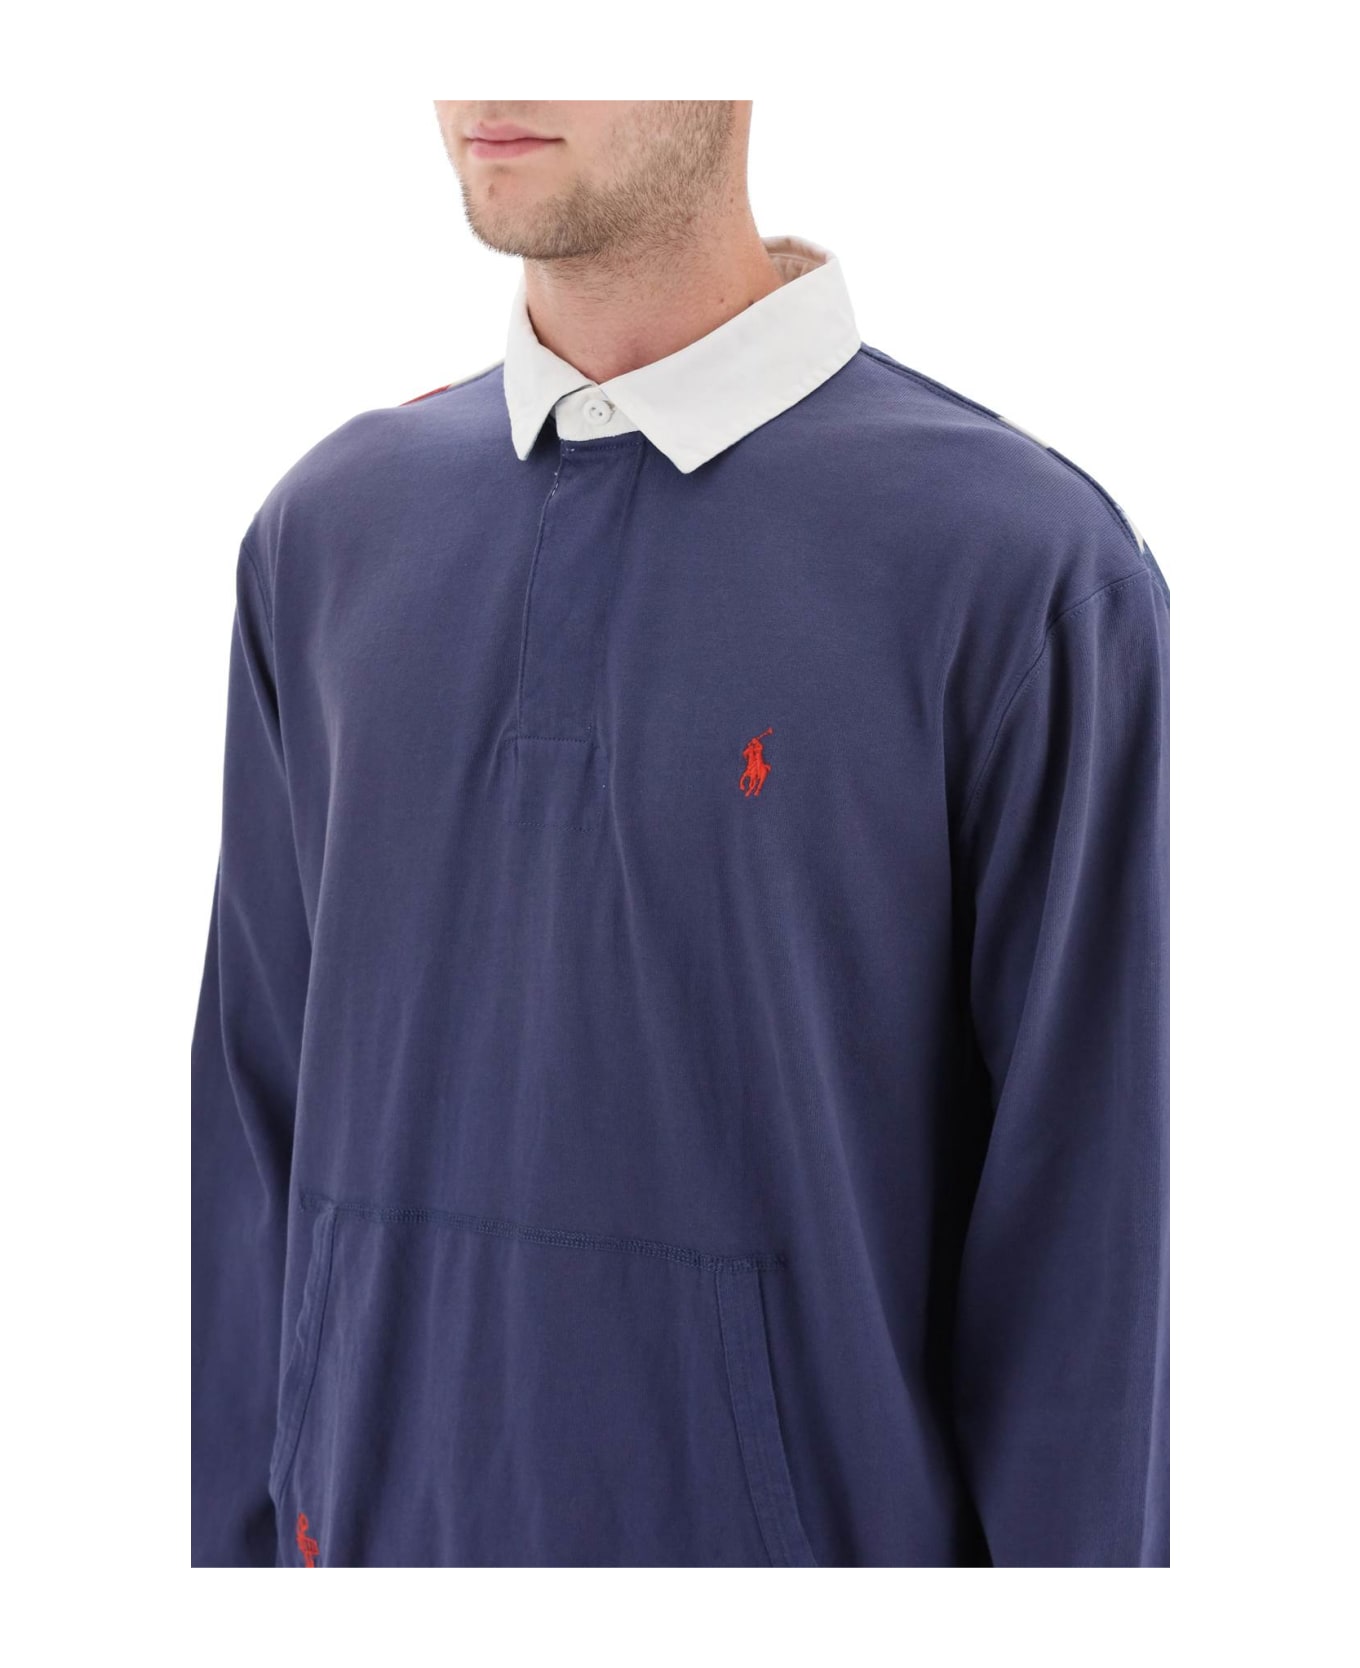 Polo Ralph Lauren Flag Patch Long Sleeve Rugby Shirt - BOATHOUSE NAVY (Blue)